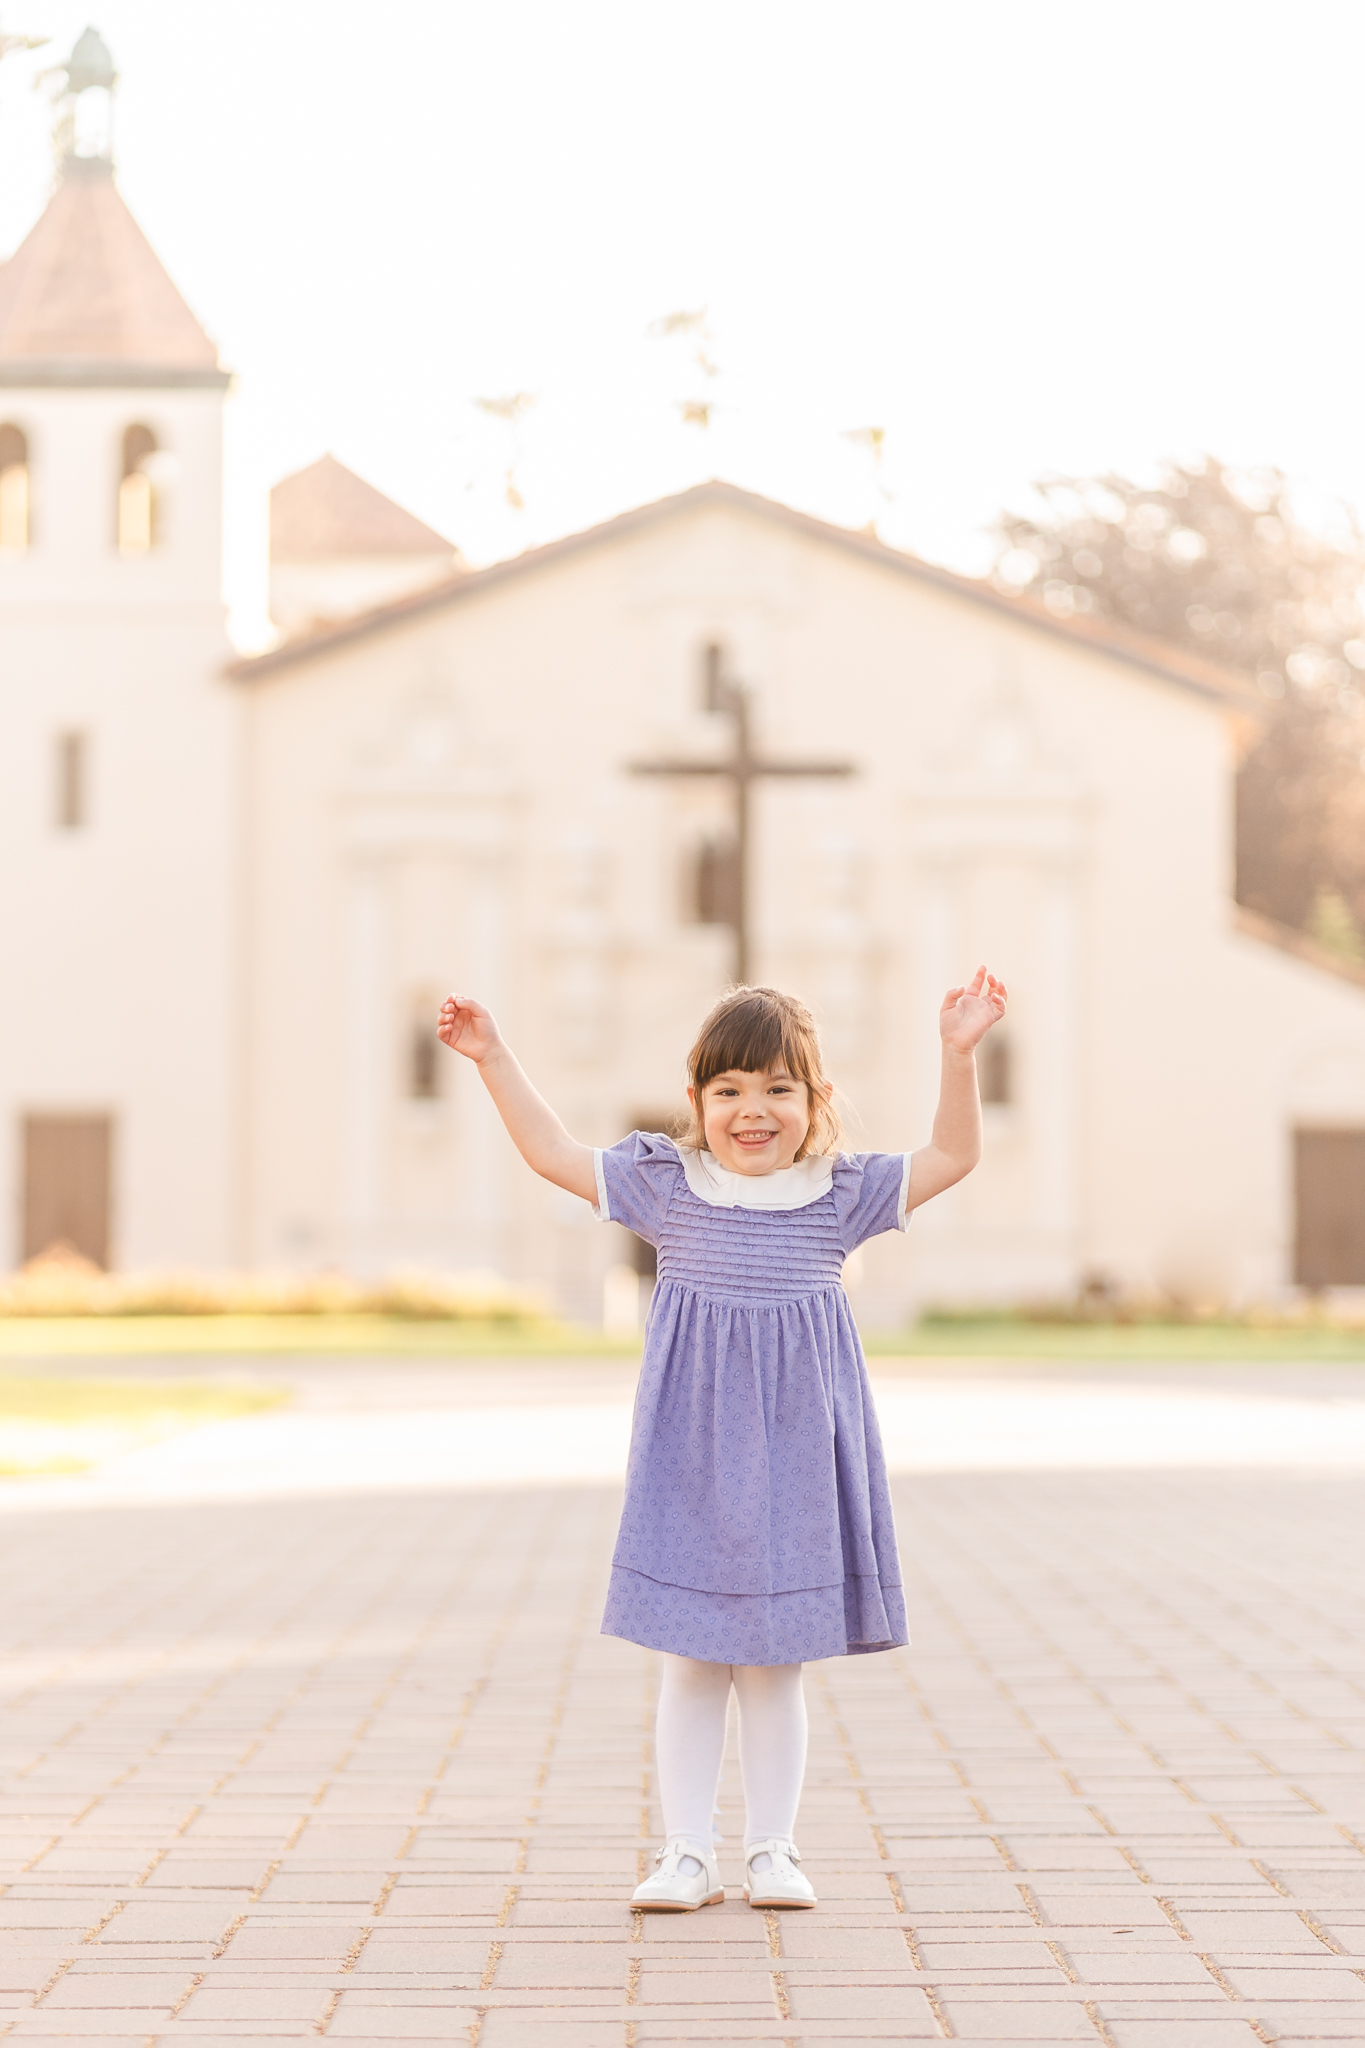 Little girl in a purple dress standing in front of the Santa Clara University mission church